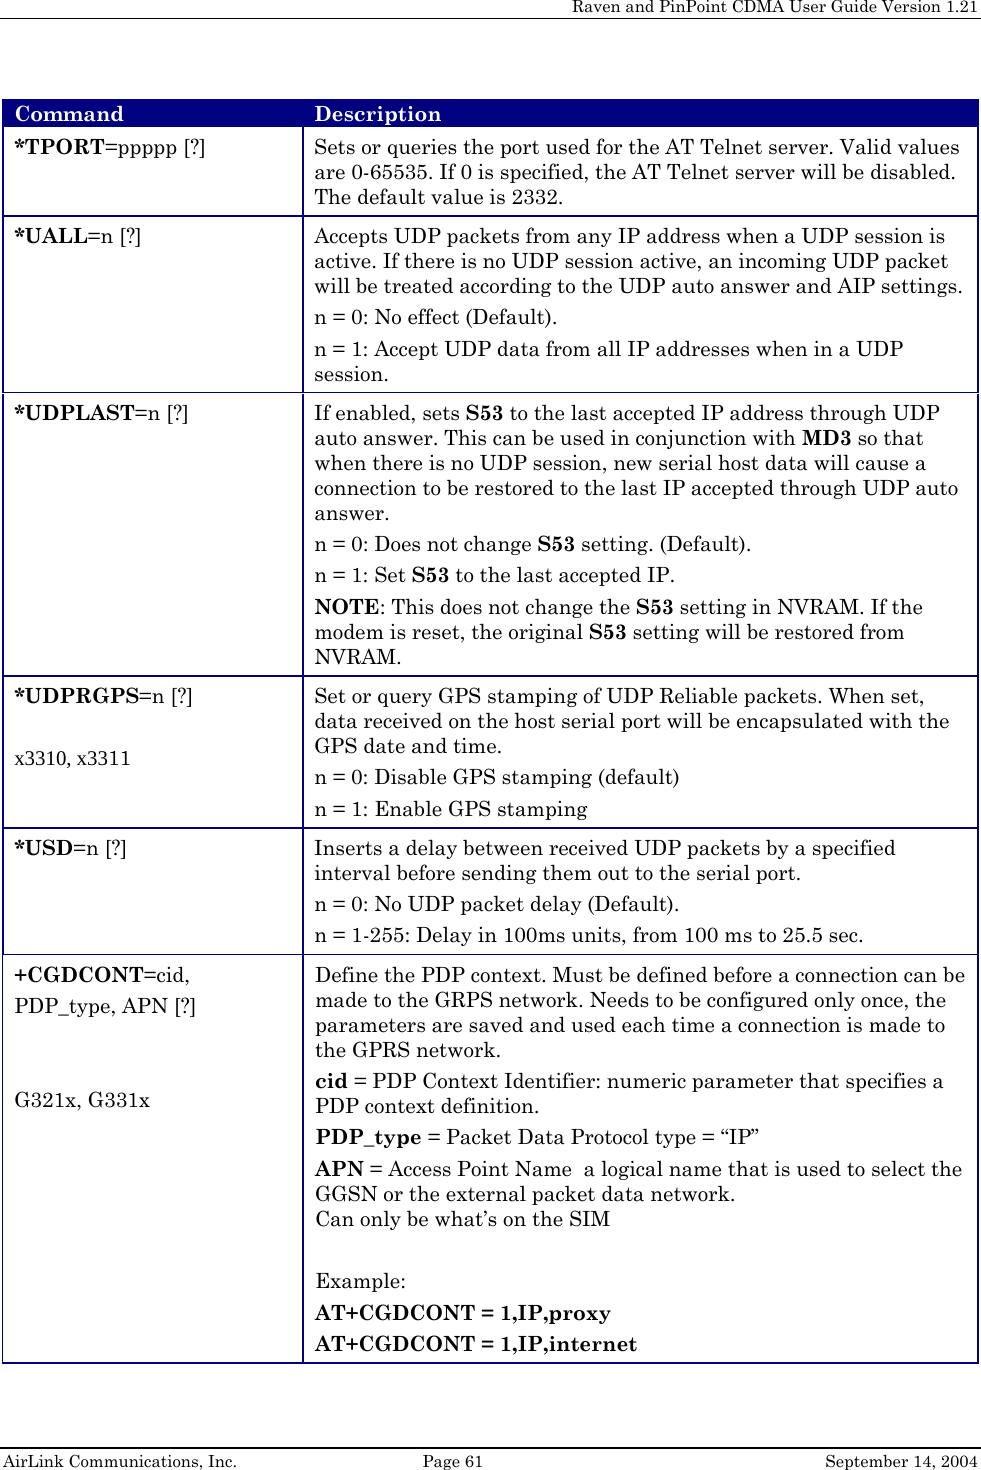     Raven and PinPoint CDMA User Guide Version 1.21  AirLink Communications, Inc.  Page 61  September 14, 2004 Command  Description *TPORT=ppppp [?]  Sets or queries the port used for the AT Telnet server. Valid values are 0-65535. If 0 is specified, the AT Telnet server will be disabled. The default value is 2332. *UALL=n [?]  Accepts UDP packets from any IP address when a UDP session is active. If there is no UDP session active, an incoming UDP packet will be treated according to the UDP auto answer and AIP settings. n = 0: No effect (Default). n = 1: Accept UDP data from all IP addresses when in a UDP session.  *UDPLAST=n [?]  If enabled, sets S53 to the last accepted IP address through UDP auto answer. This can be used in conjunction with MD3 so that when there is no UDP session, new serial host data will cause a connection to be restored to the last IP accepted through UDP auto answer. n = 0: Does not change S53 setting. (Default). n = 1: Set S53 to the last accepted IP. NOTE: This does not change the S53 setting in NVRAM. If the modem is reset, the original S53 setting will be restored from NVRAM. *UDPRGPS=n [?]  x3310, x3311 Set or query GPS stamping of UDP Reliable packets. When set, data received on the host serial port will be encapsulated with the GPS date and time. n = 0: Disable GPS stamping (default) n = 1: Enable GPS stamping *USD=n [?]  Inserts a delay between received UDP packets by a specified interval before sending them out to the serial port. n = 0: No UDP packet delay (Default). n = 1-255: Delay in 100ms units, from 100 ms to 25.5 sec. +CGDCONT=cid, PDP_type, APN [?]   G321x, G331x Define the PDP context. Must be defined before a connection can be made to the GRPS network. Needs to be configured only once, the parameters are saved and used each time a connection is made to the GPRS network. cid = PDP Context Identifier: numeric parameter that specifies a PDP context definition.  PDP_type = Packet Data Protocol type = “IP” APN = Access Point Name  a logical name that is used to select the GGSN or the external packet data network. Can only be what’s on the SIM  Example: AT+CGDCONT = 1,IP,proxy AT+CGDCONT = 1,IP,internet 